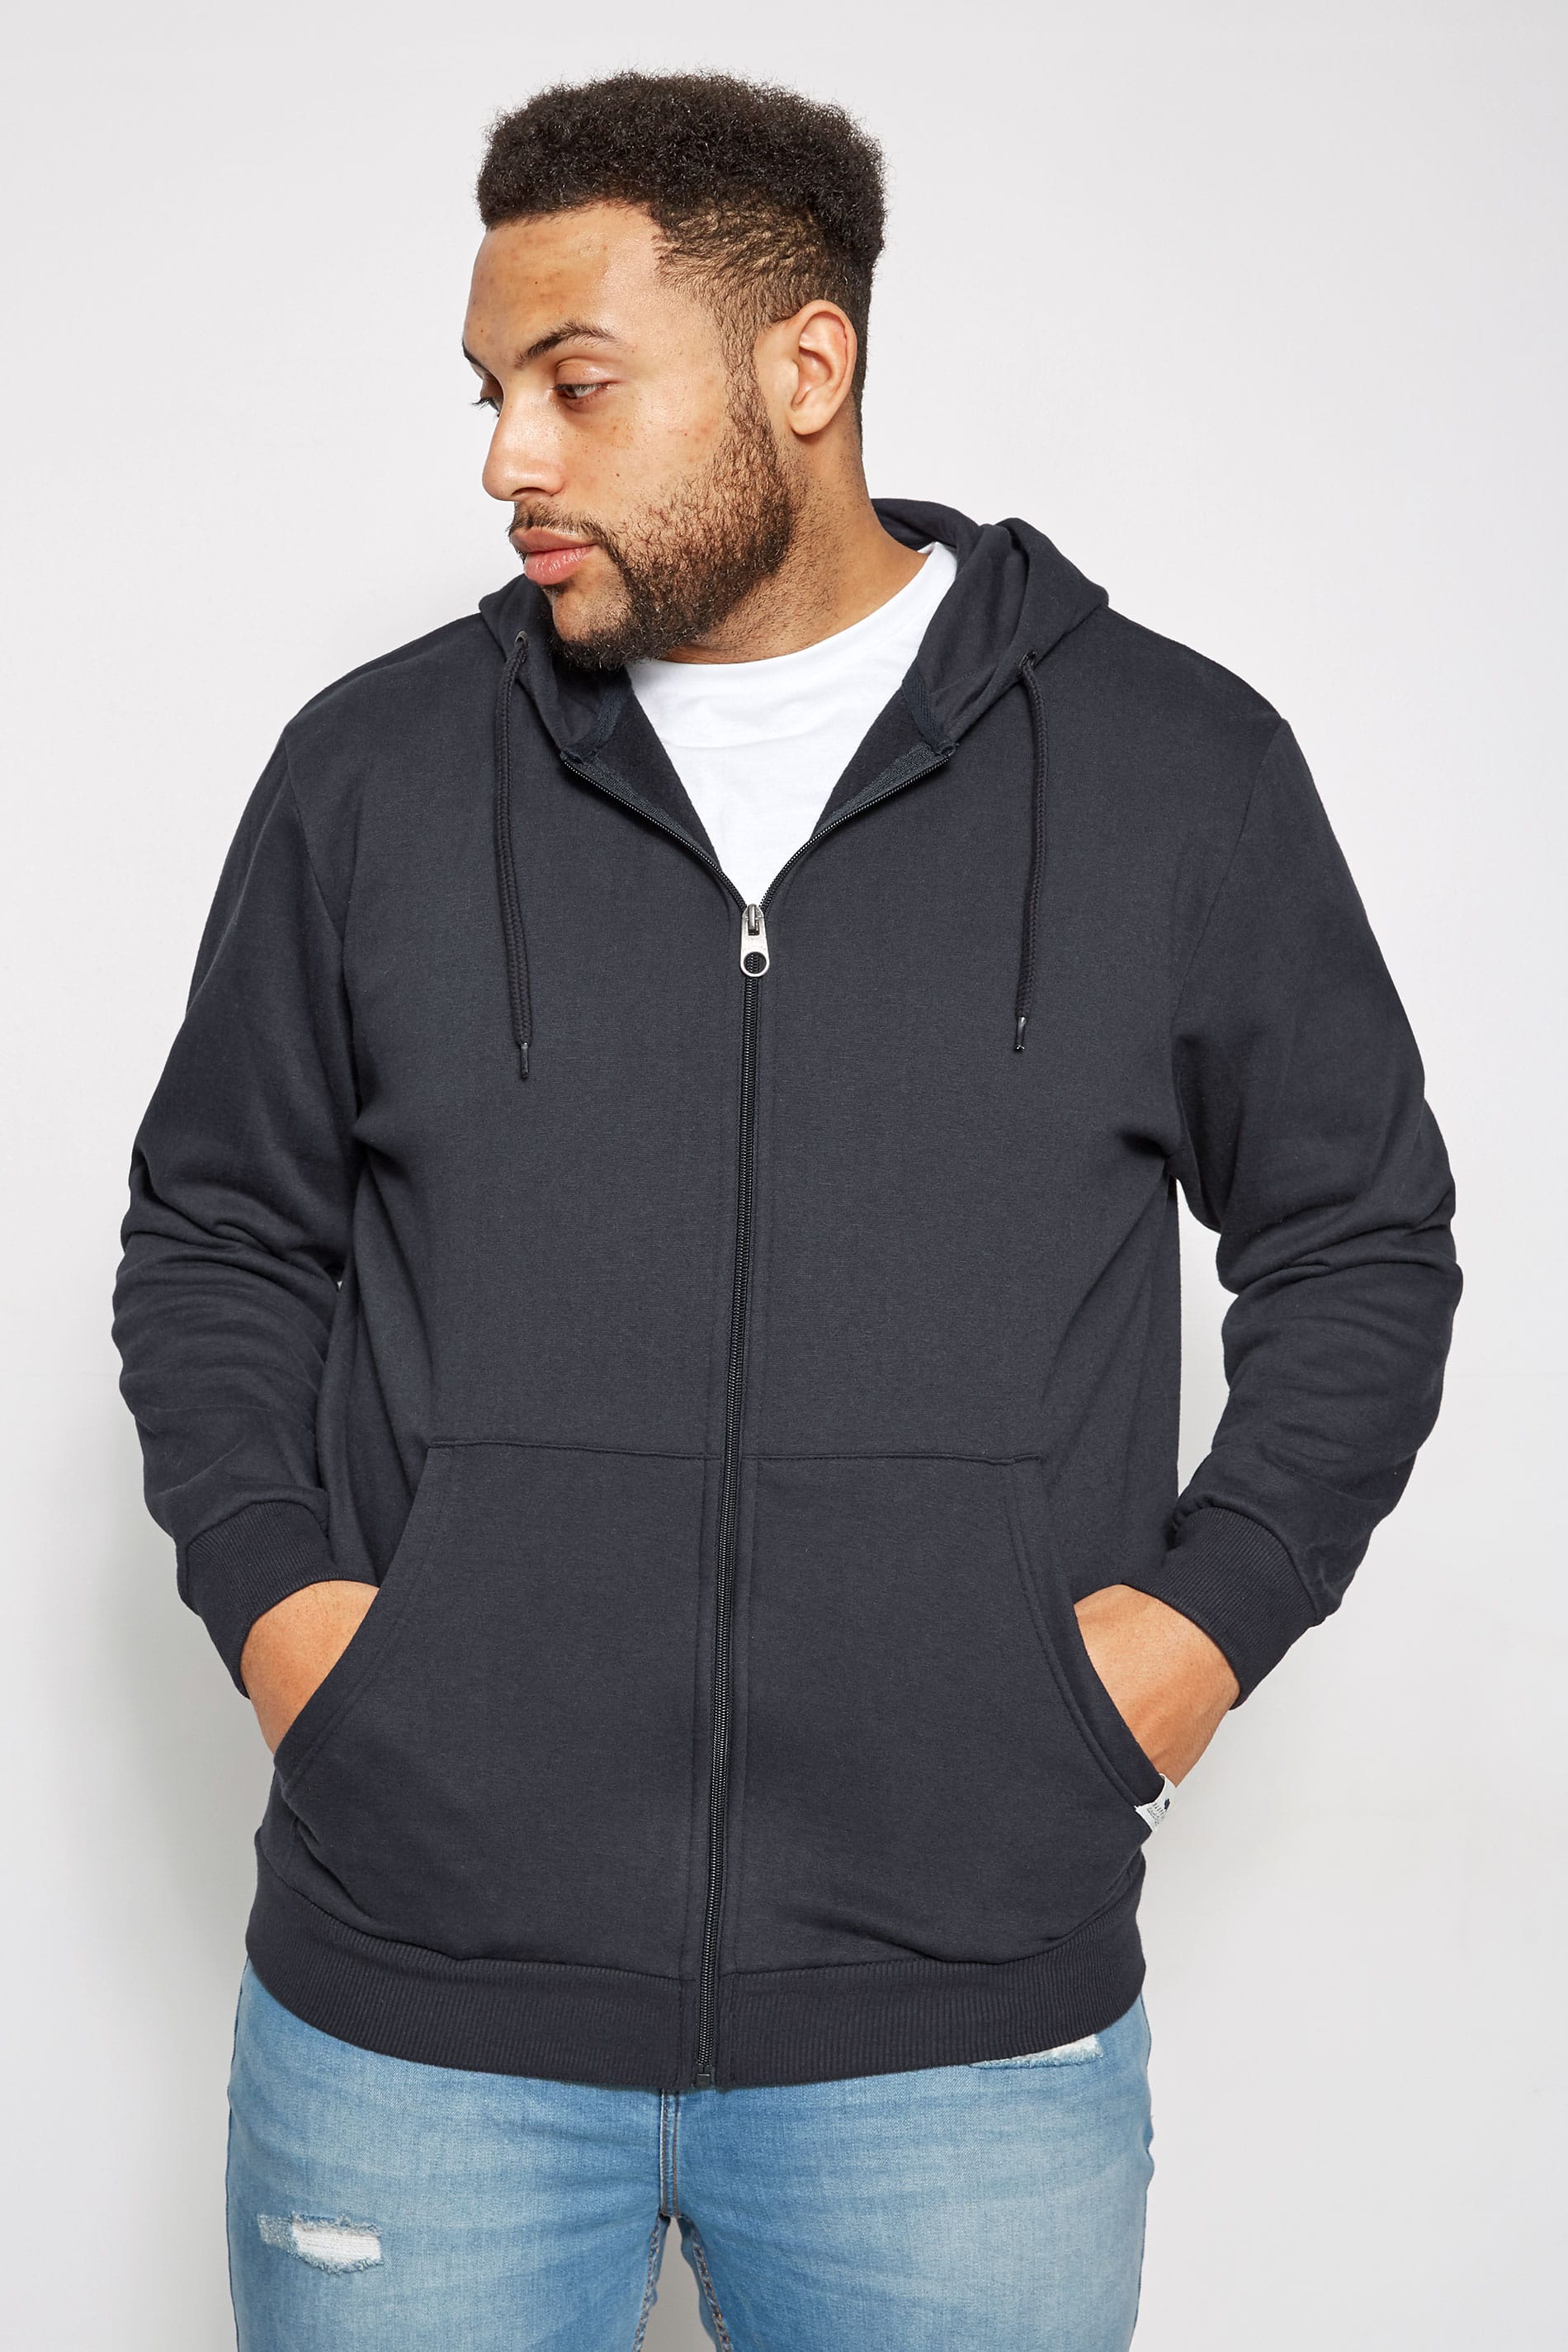 BadRhino Navy Basic Sweat Hoodie With Pockets - Extra Large Sizes L to ...